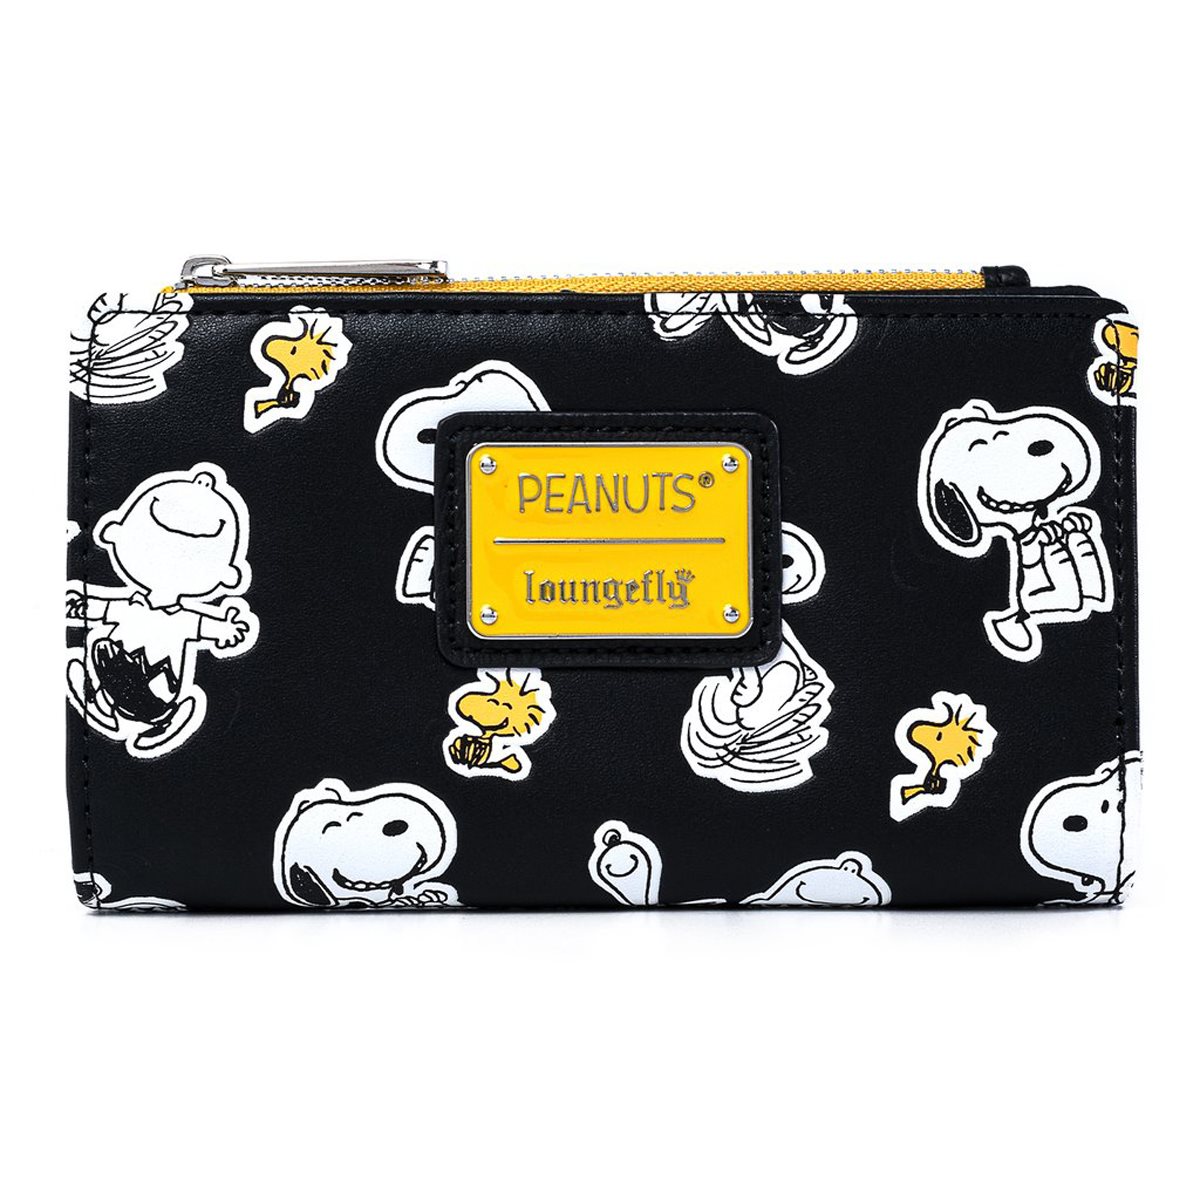 New Snoopy Wallet! 